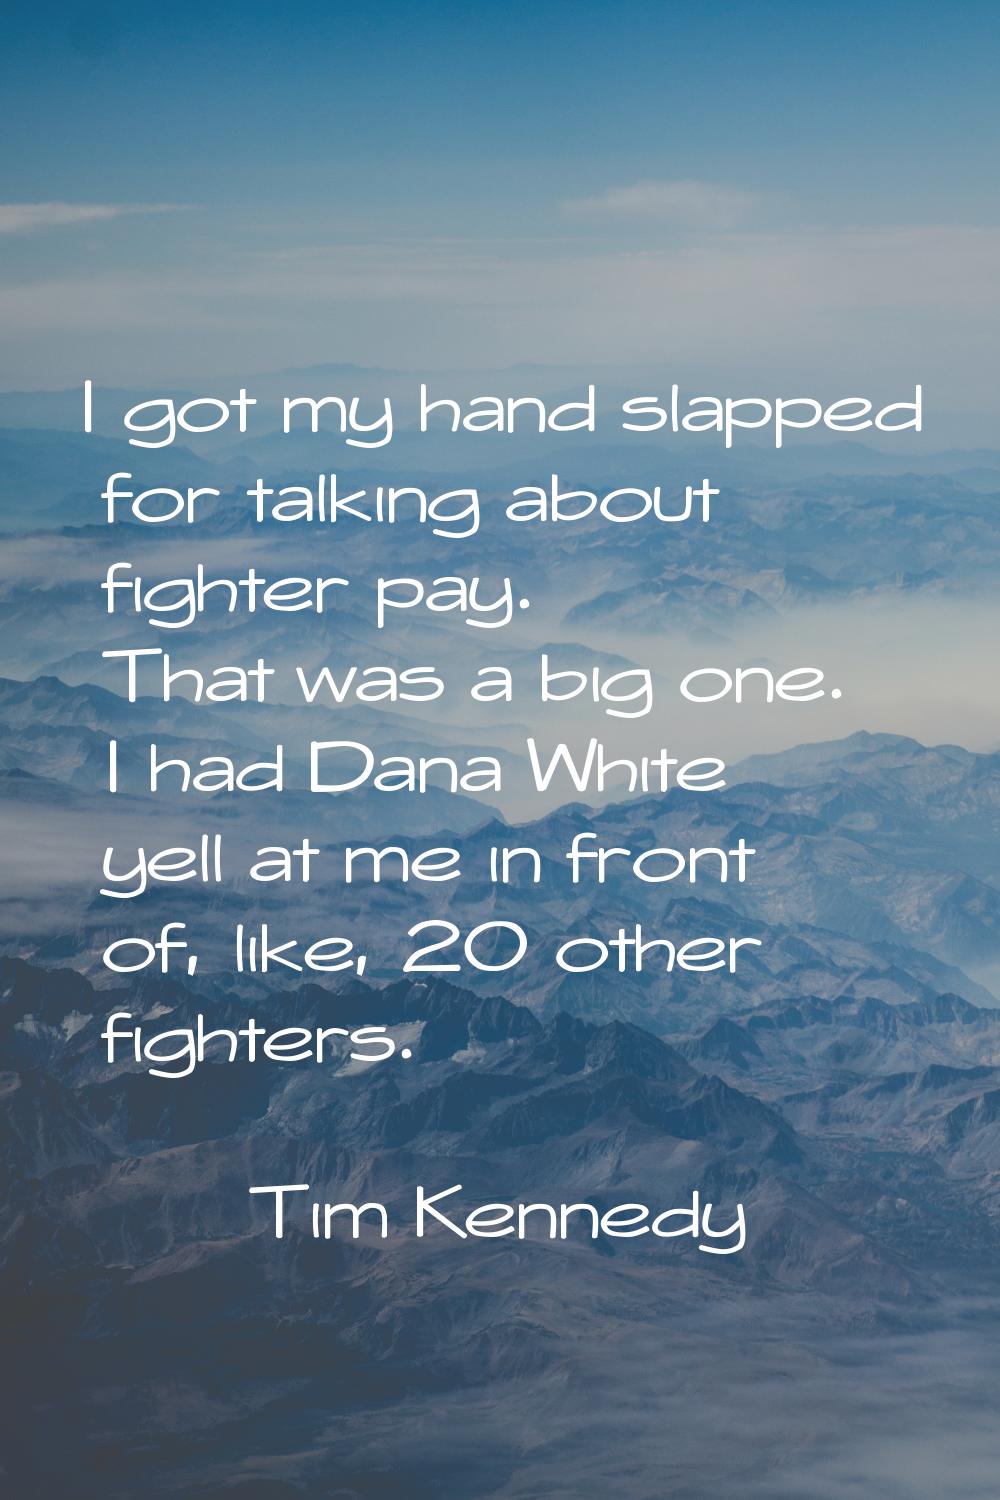 I got my hand slapped for talking about fighter pay. That was a big one. I had Dana White yell at m